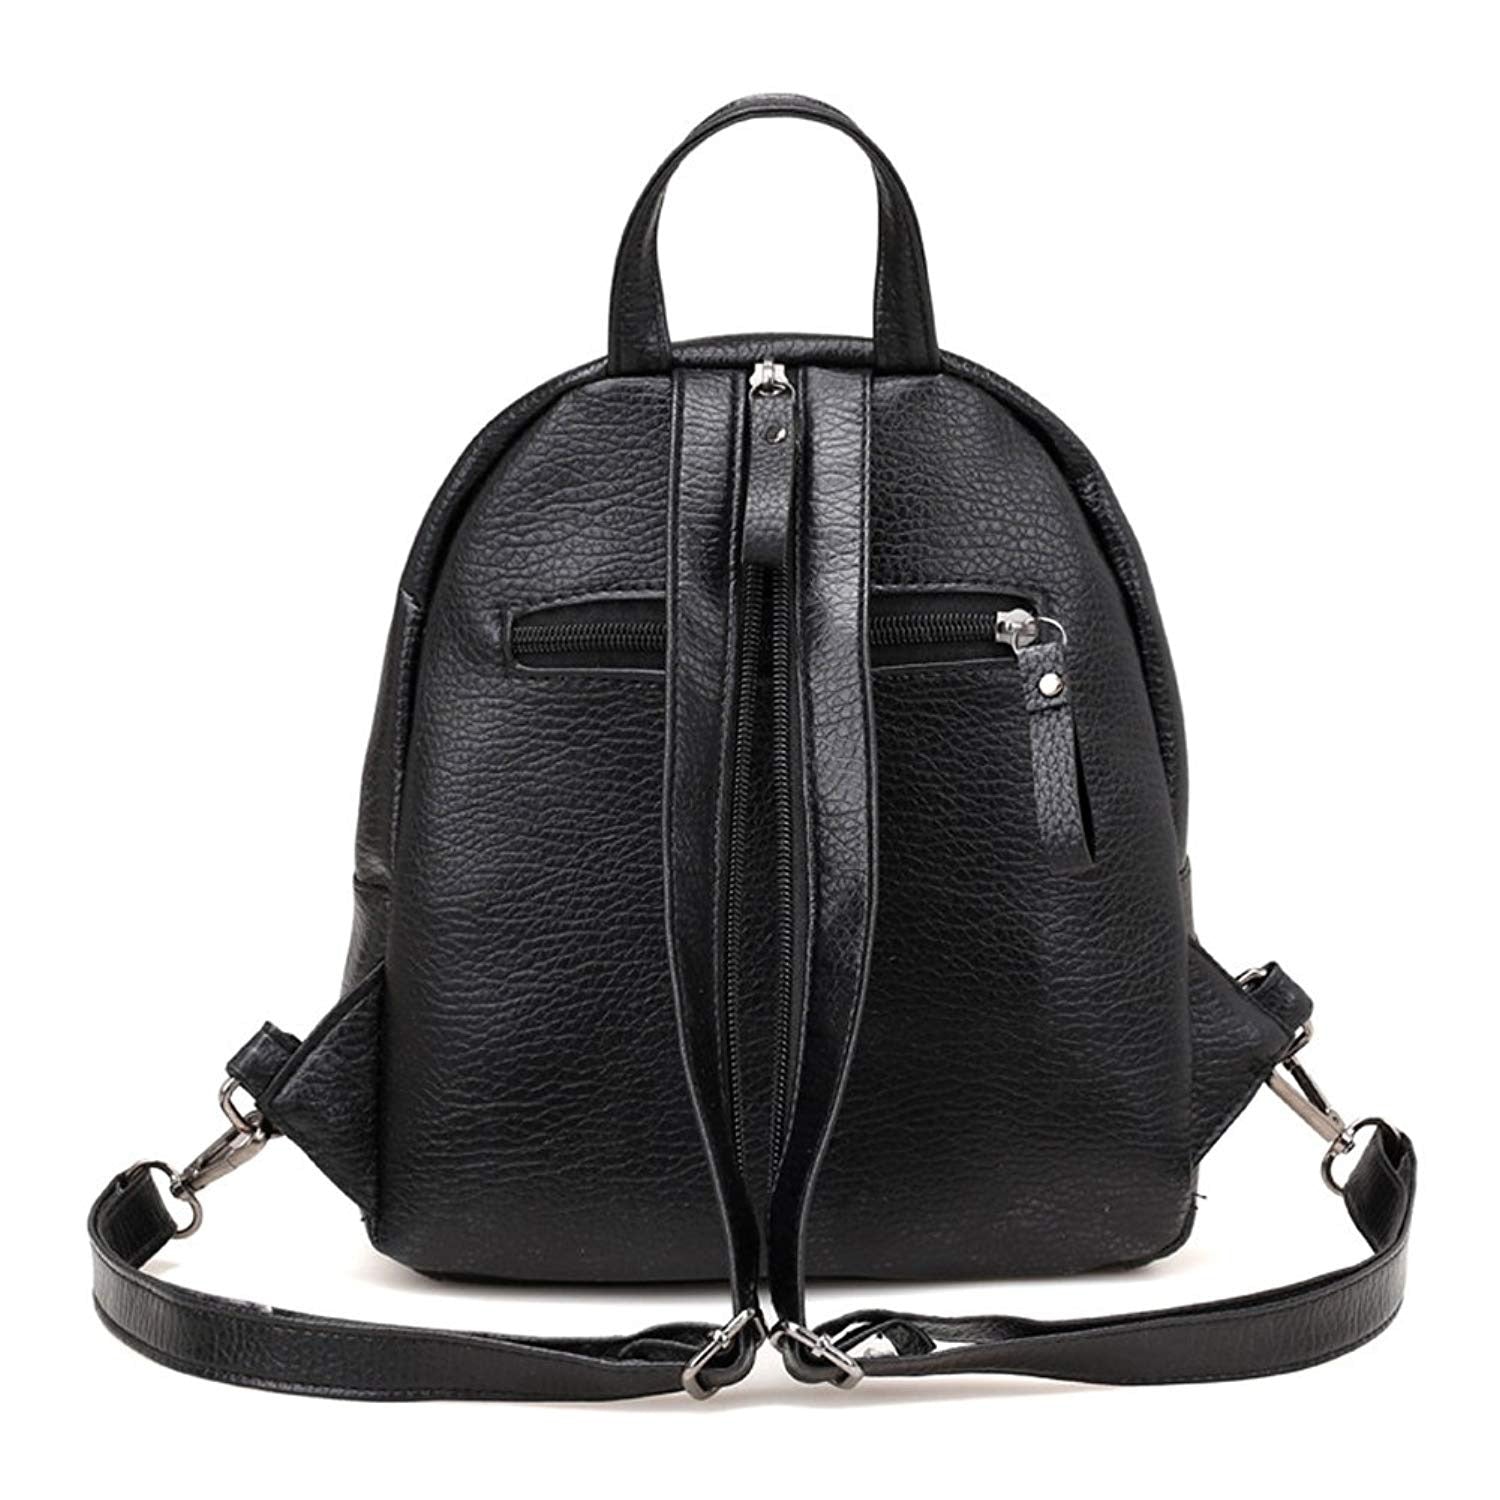 Mini Backpack, Classic Leather Travel Daypack Shoulder Bag for Women Girls - ebowsos